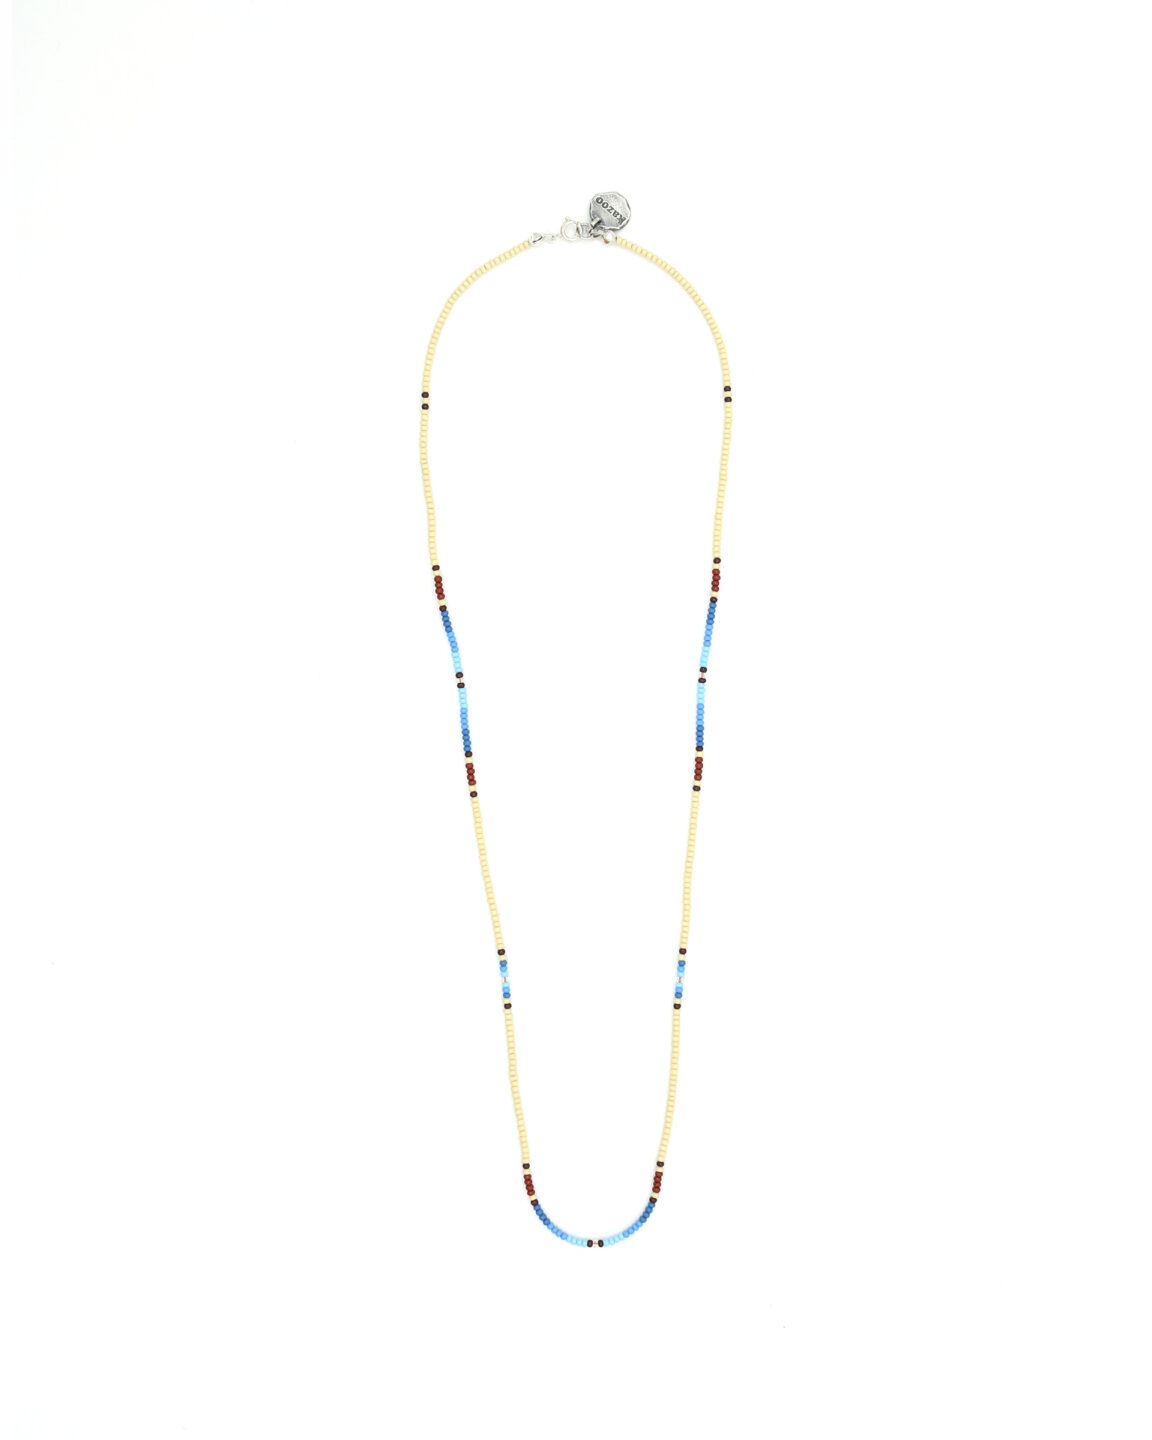 BLUE - BEIGE / BEADS NECKLACE